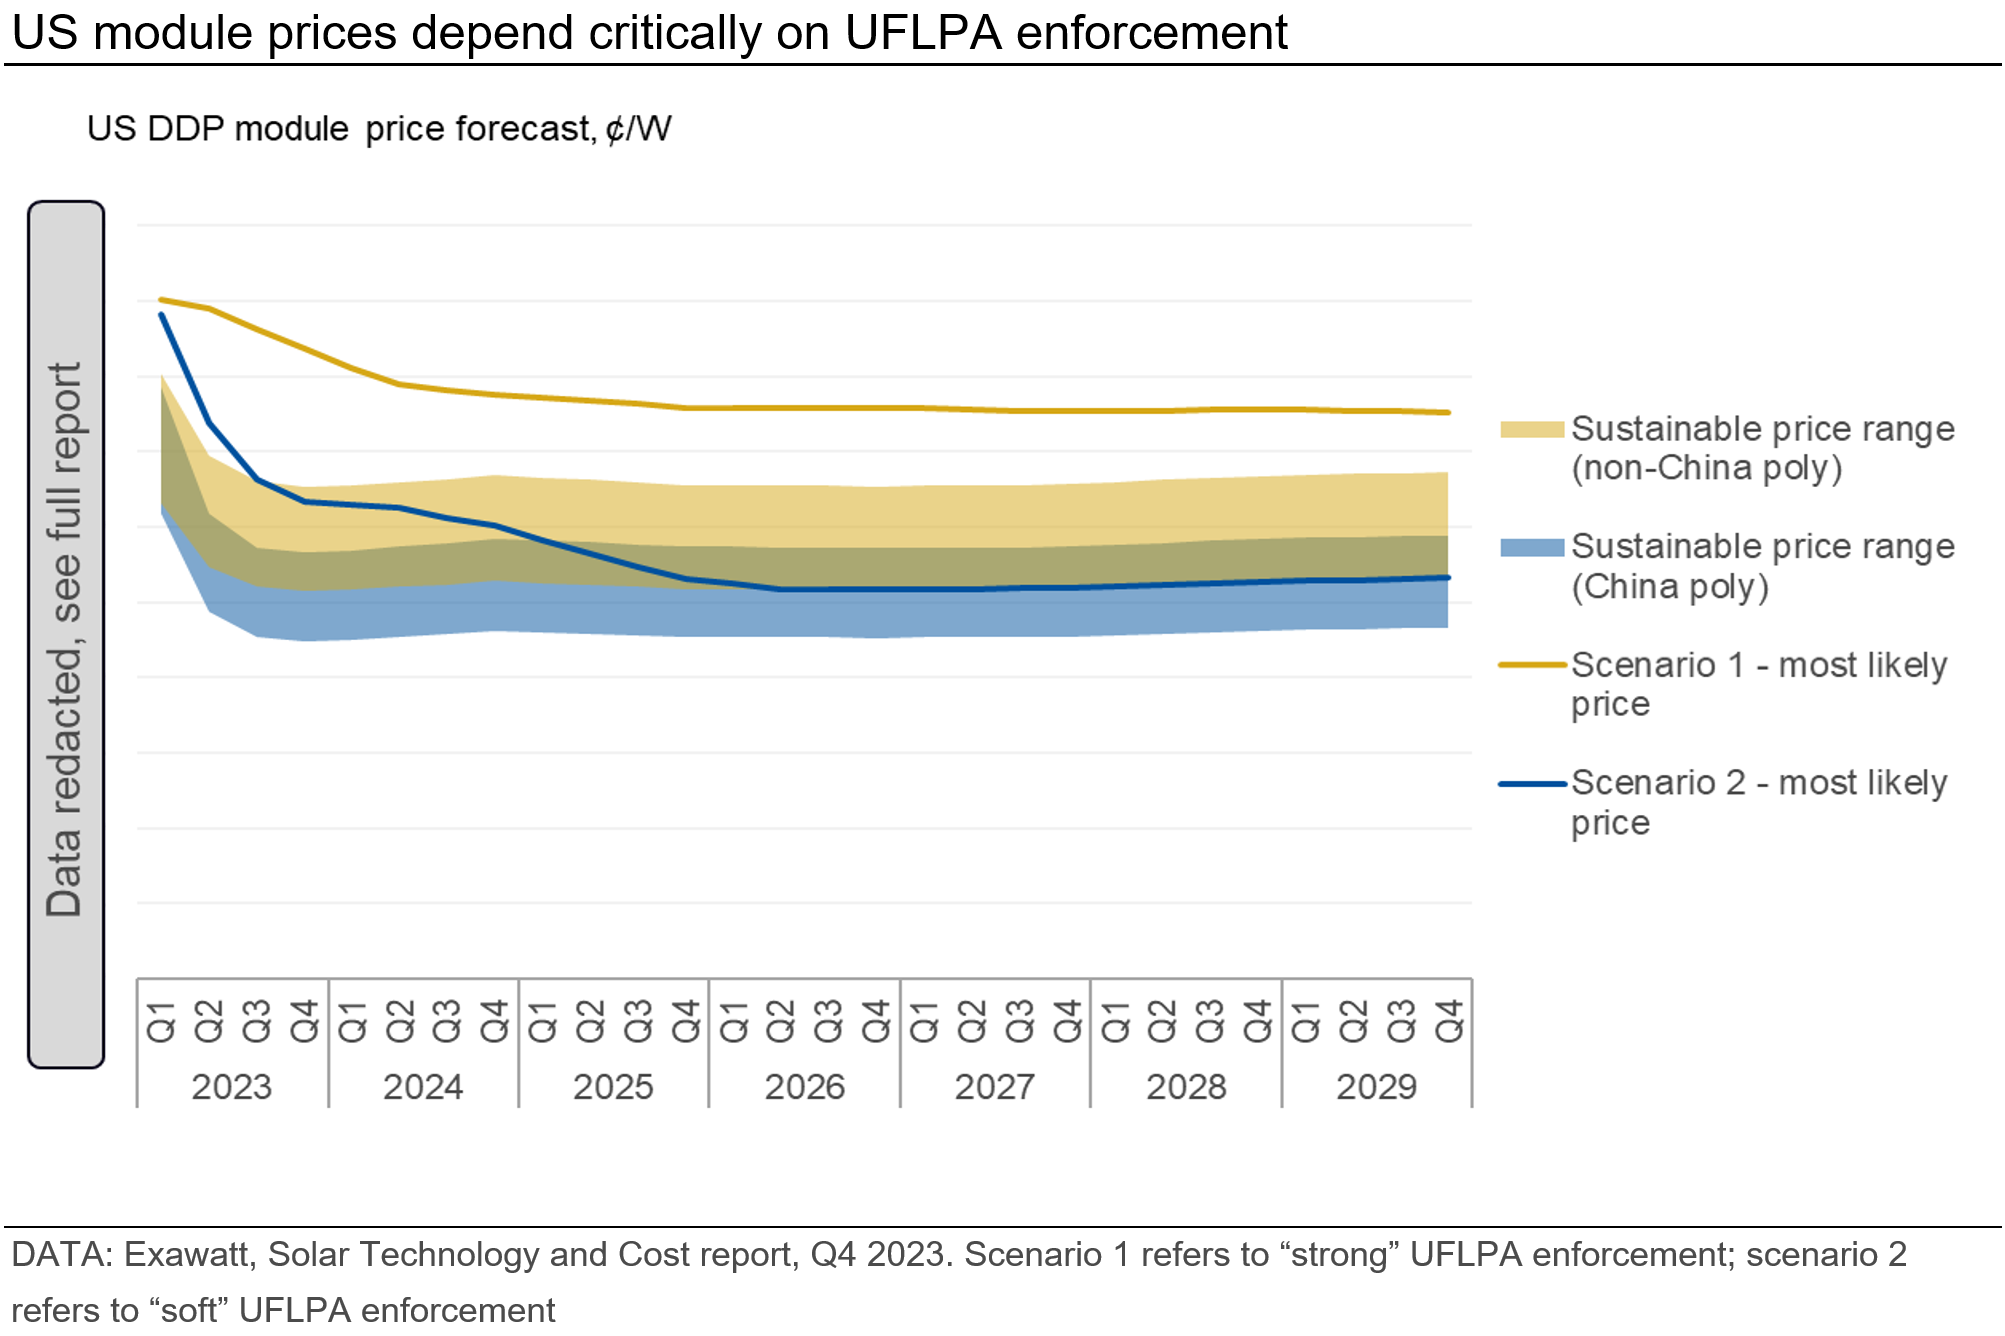 Graph showing how US module prices depend critically on UFLPA enforcement